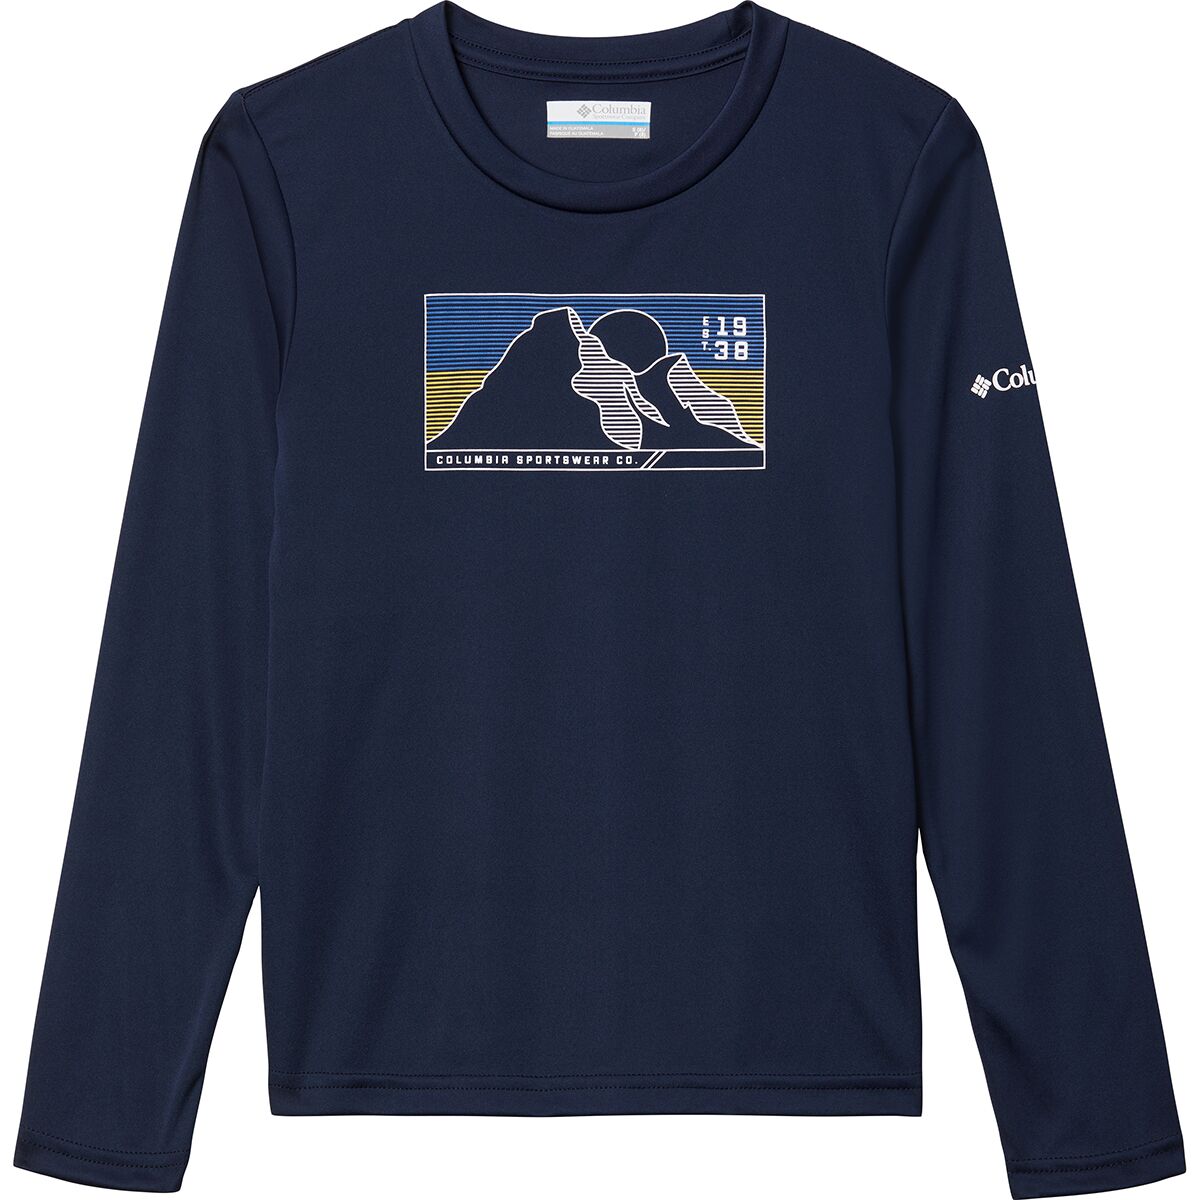 Columbia Grizzly Peak Long-Sleeve Graphic T-Shirt - Toddler Boys'